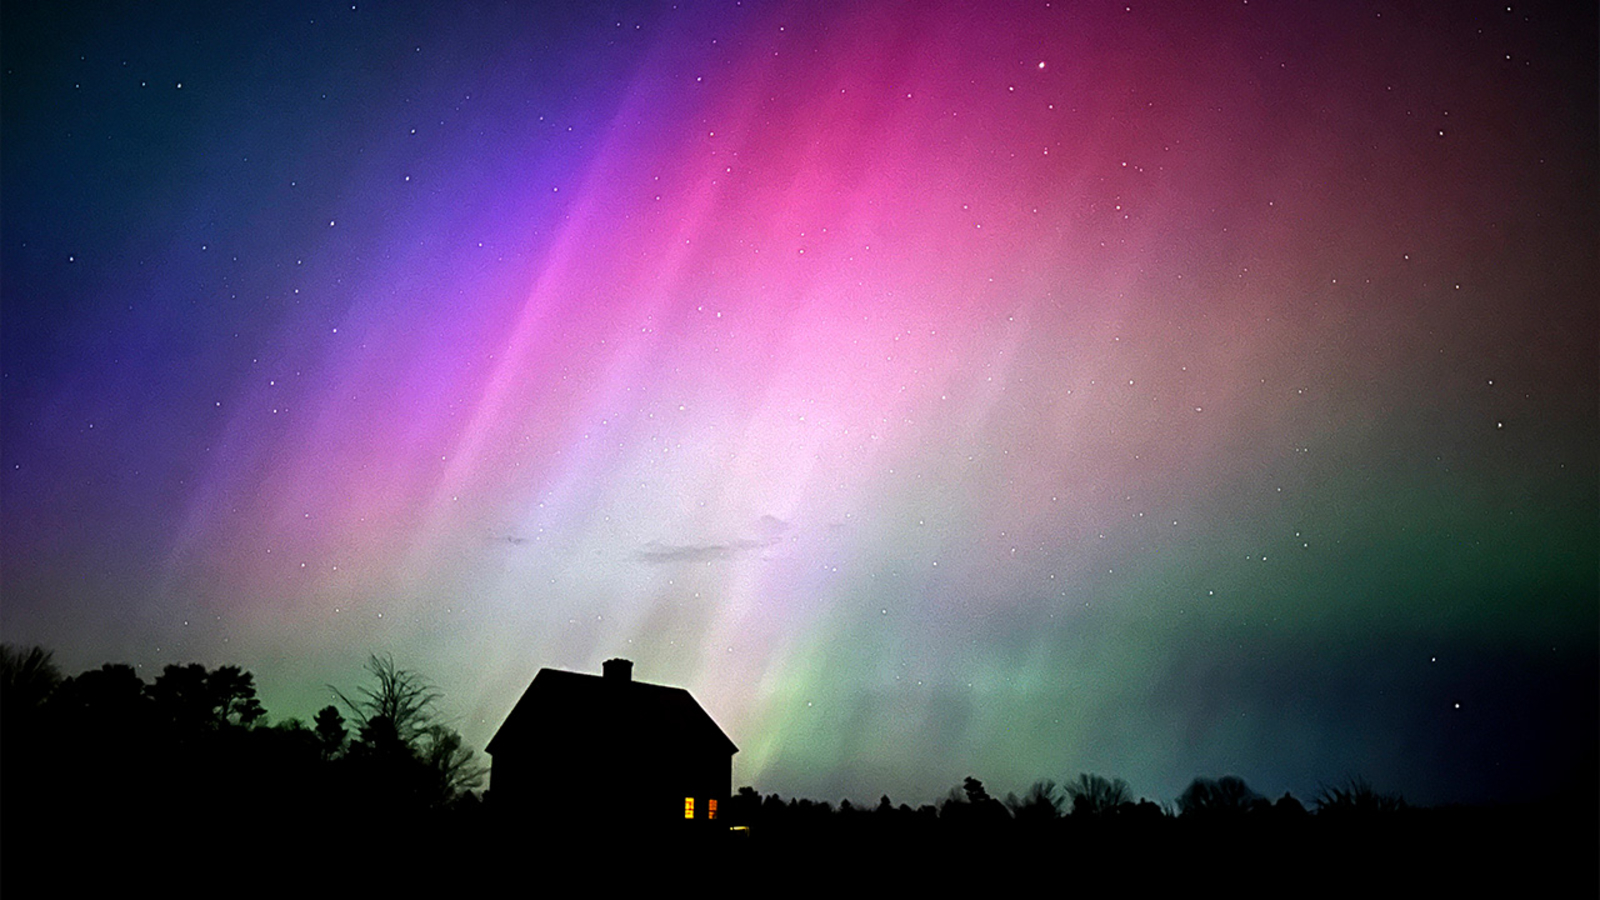 Northern Lights in the US: Solar storm hits Earth, producing colorful light shows across Northern Hemisphere [Video]